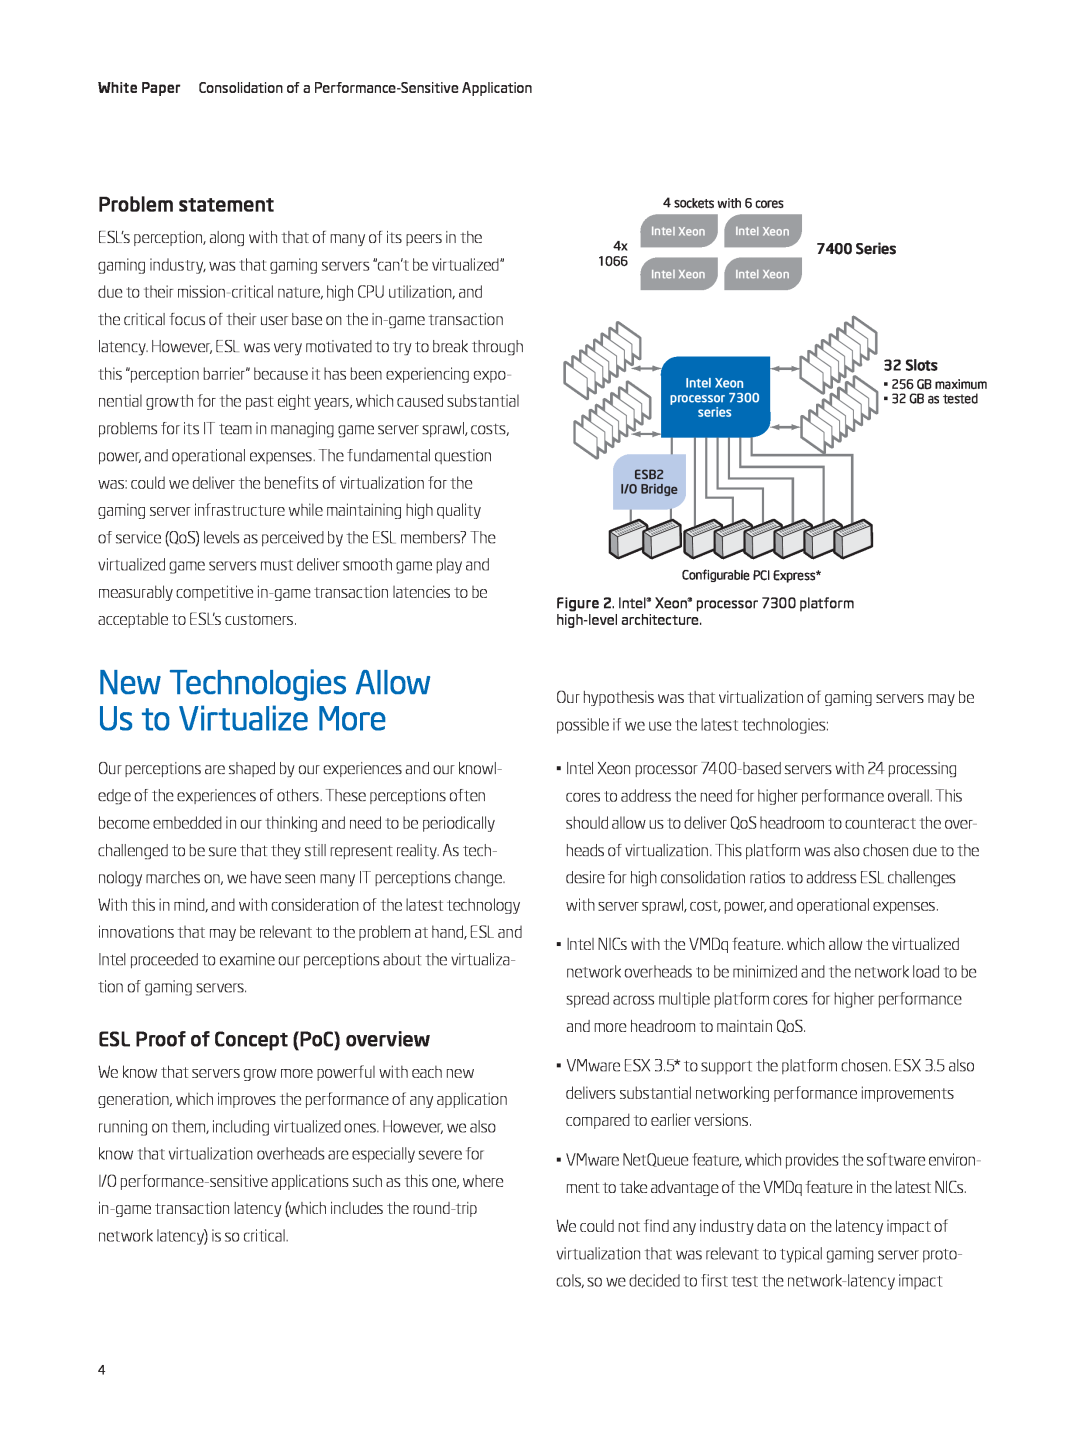 Intel 7400 manual Problem statement, ESL Proof of Concept PoC overview, New Technologies Allow Us to Virtualize More 